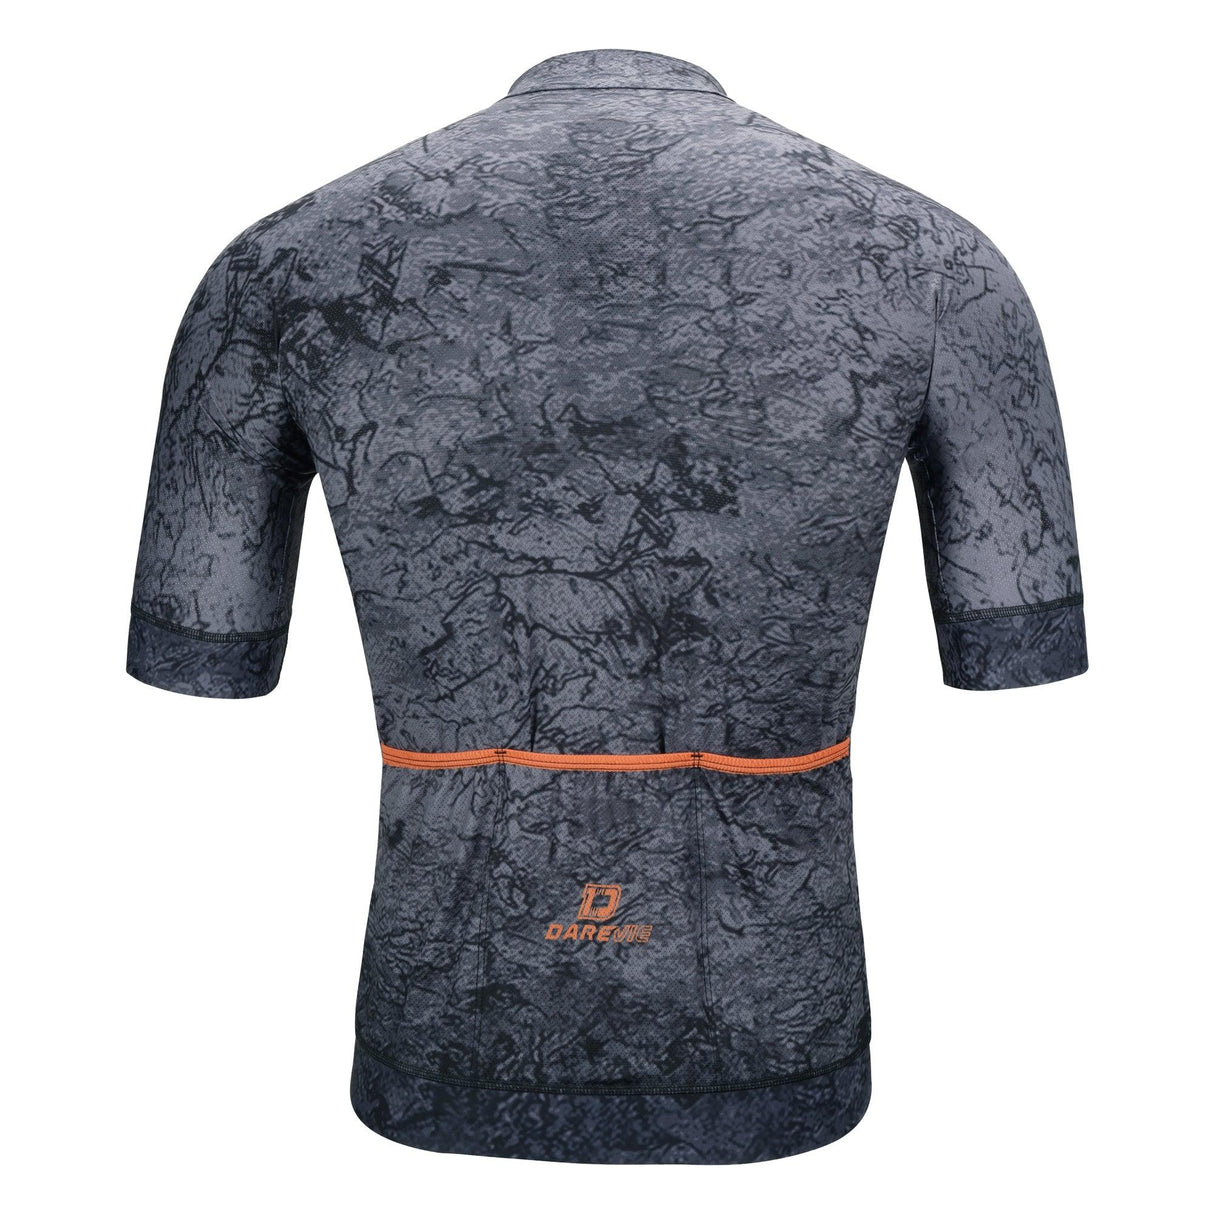 DVJ162 Breathable Cycling Clothing Cycling Jersey Darevie Shop